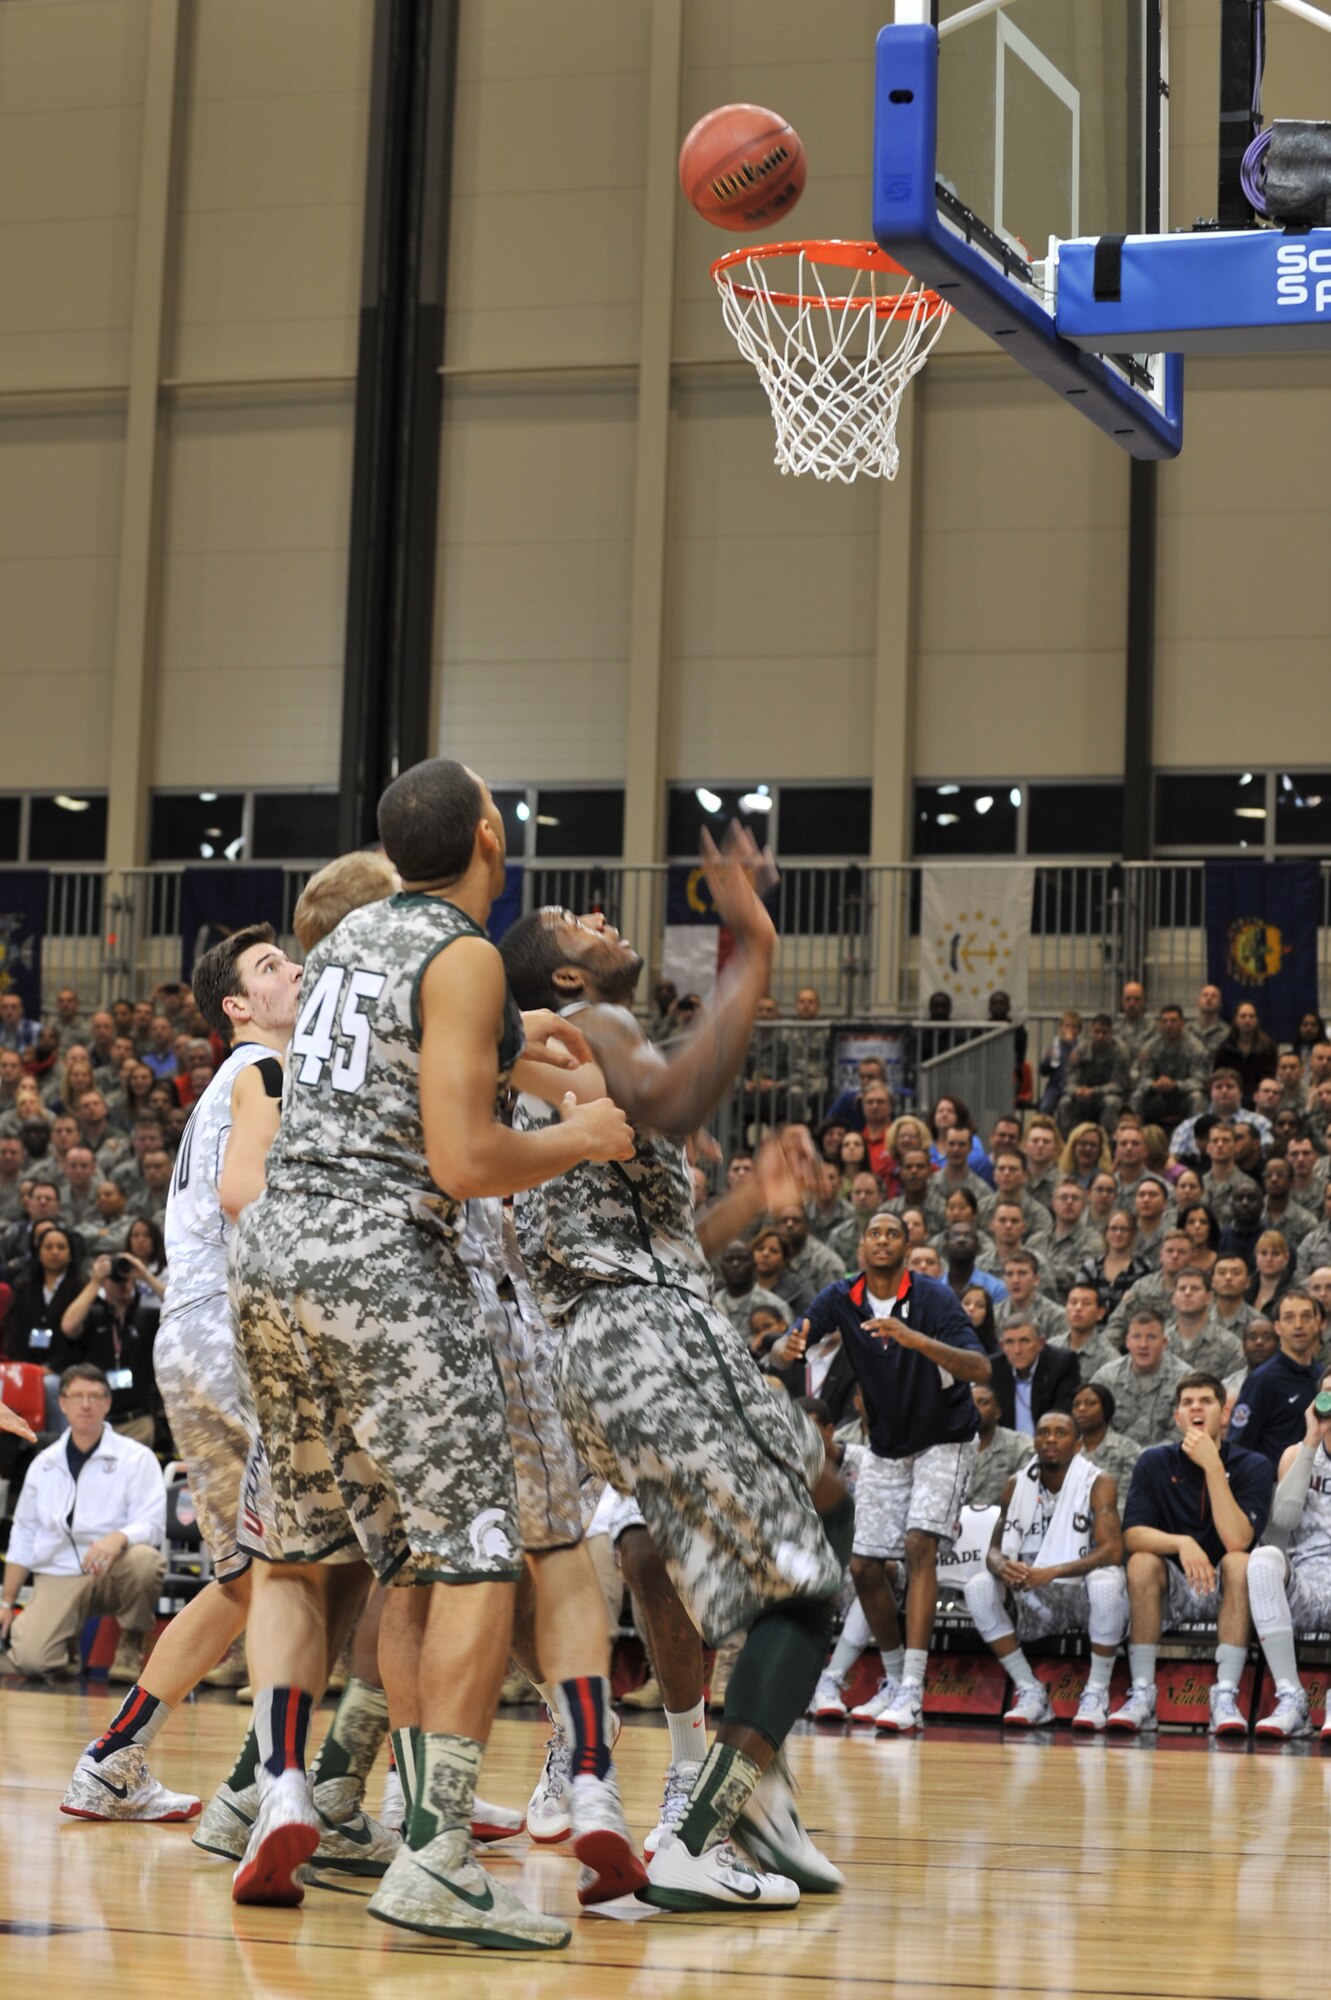 Team members from Michigan State and the University of Connecticut wait for a ball to rebound during the 2012 Armed Forces Classic on Ramstein Air Base, Germany, Nov. 10, 2012. The match-up between MSU and UCONN is part of ESPN's Veteran's week initiative to honor the men and women who have served and are still serving in the U.S. military. (U.S. Air Force photo/Senior Airman Caitlin O’Neil-McKeown)